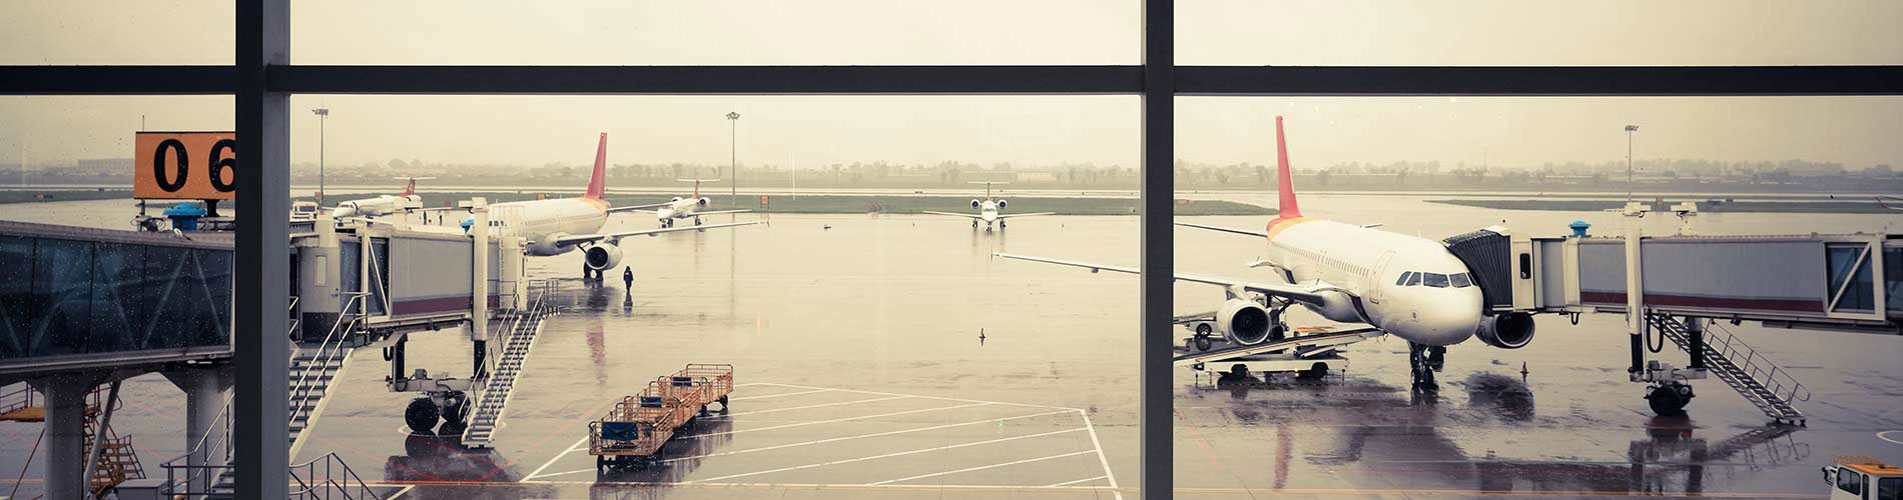 An airport terminal on a rainy day